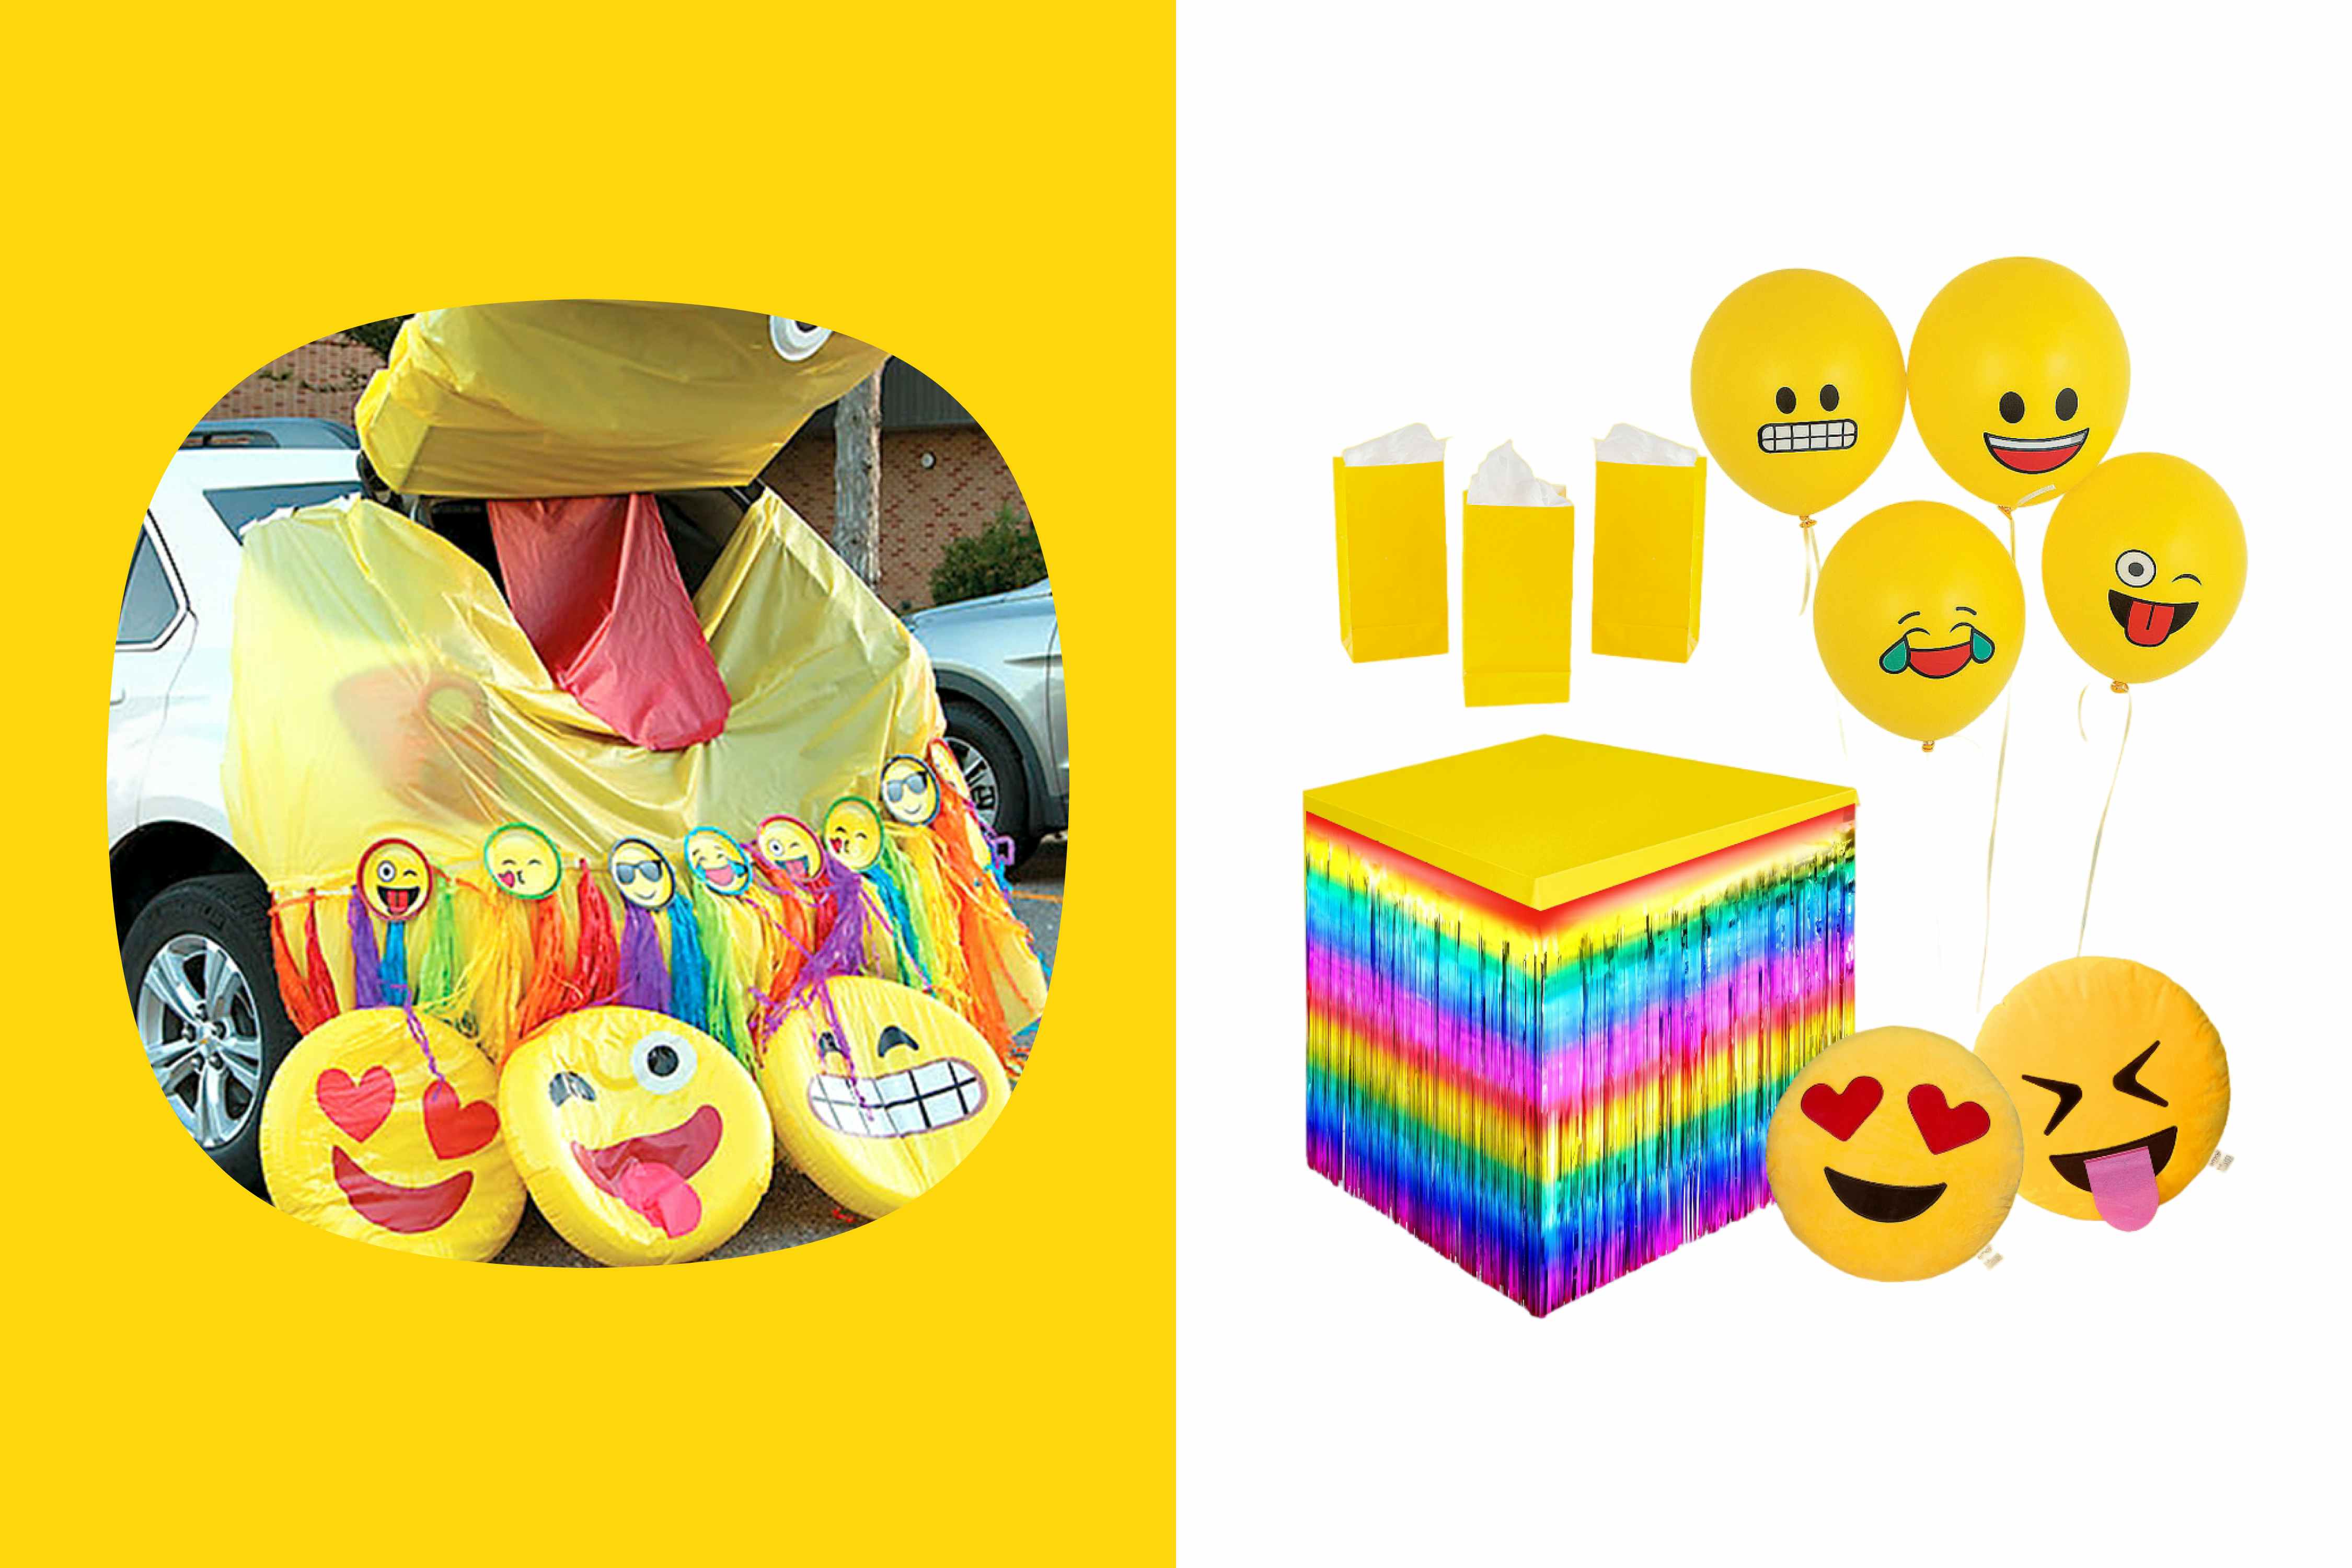 a trunk or treat idea with an Emoji theme and supplies